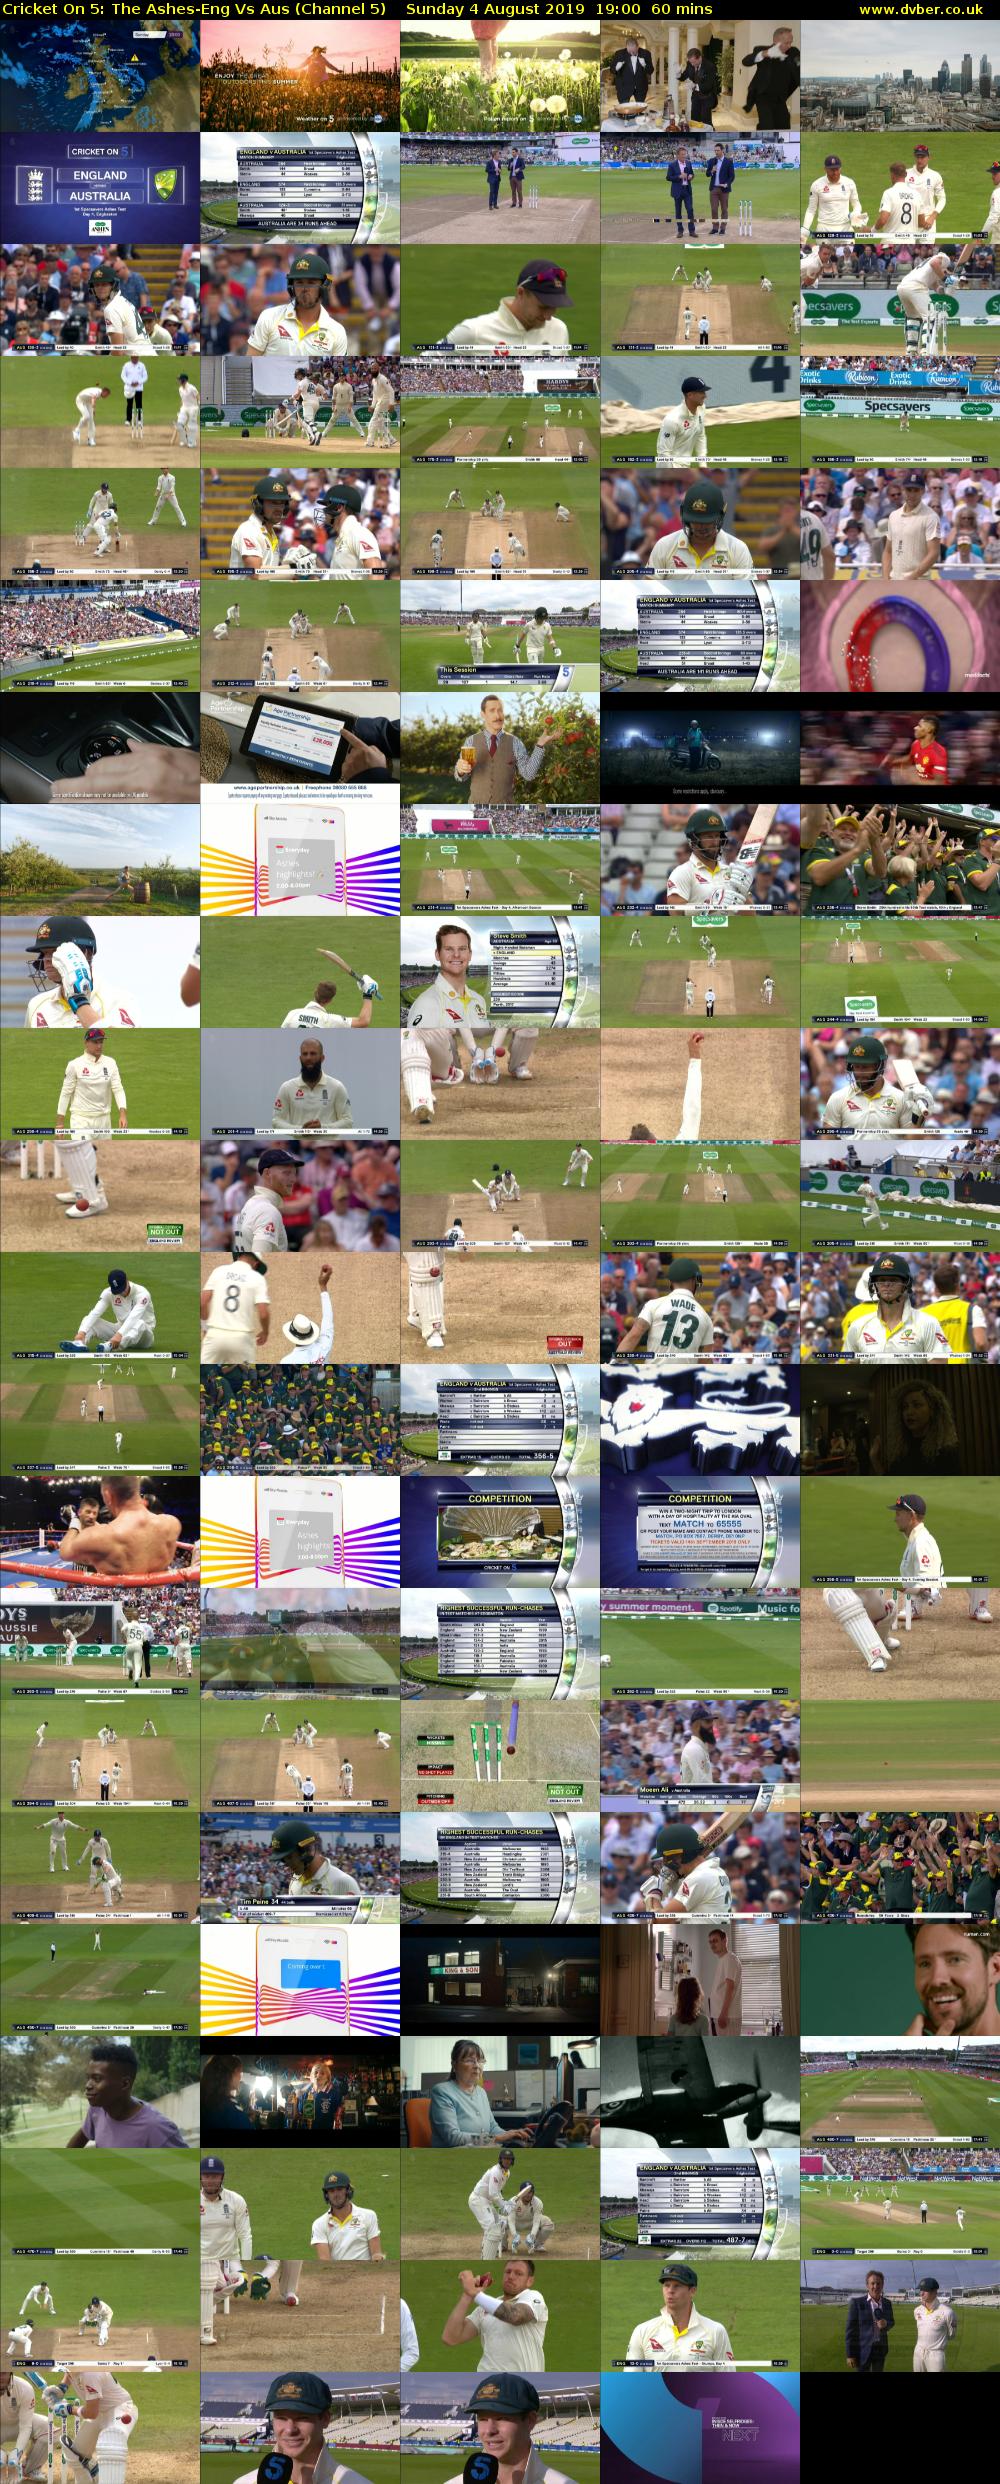 Cricket On 5: The Ashes-Eng Vs Aus (Channel 5) Sunday 4 August 2019 19:00 - 20:00